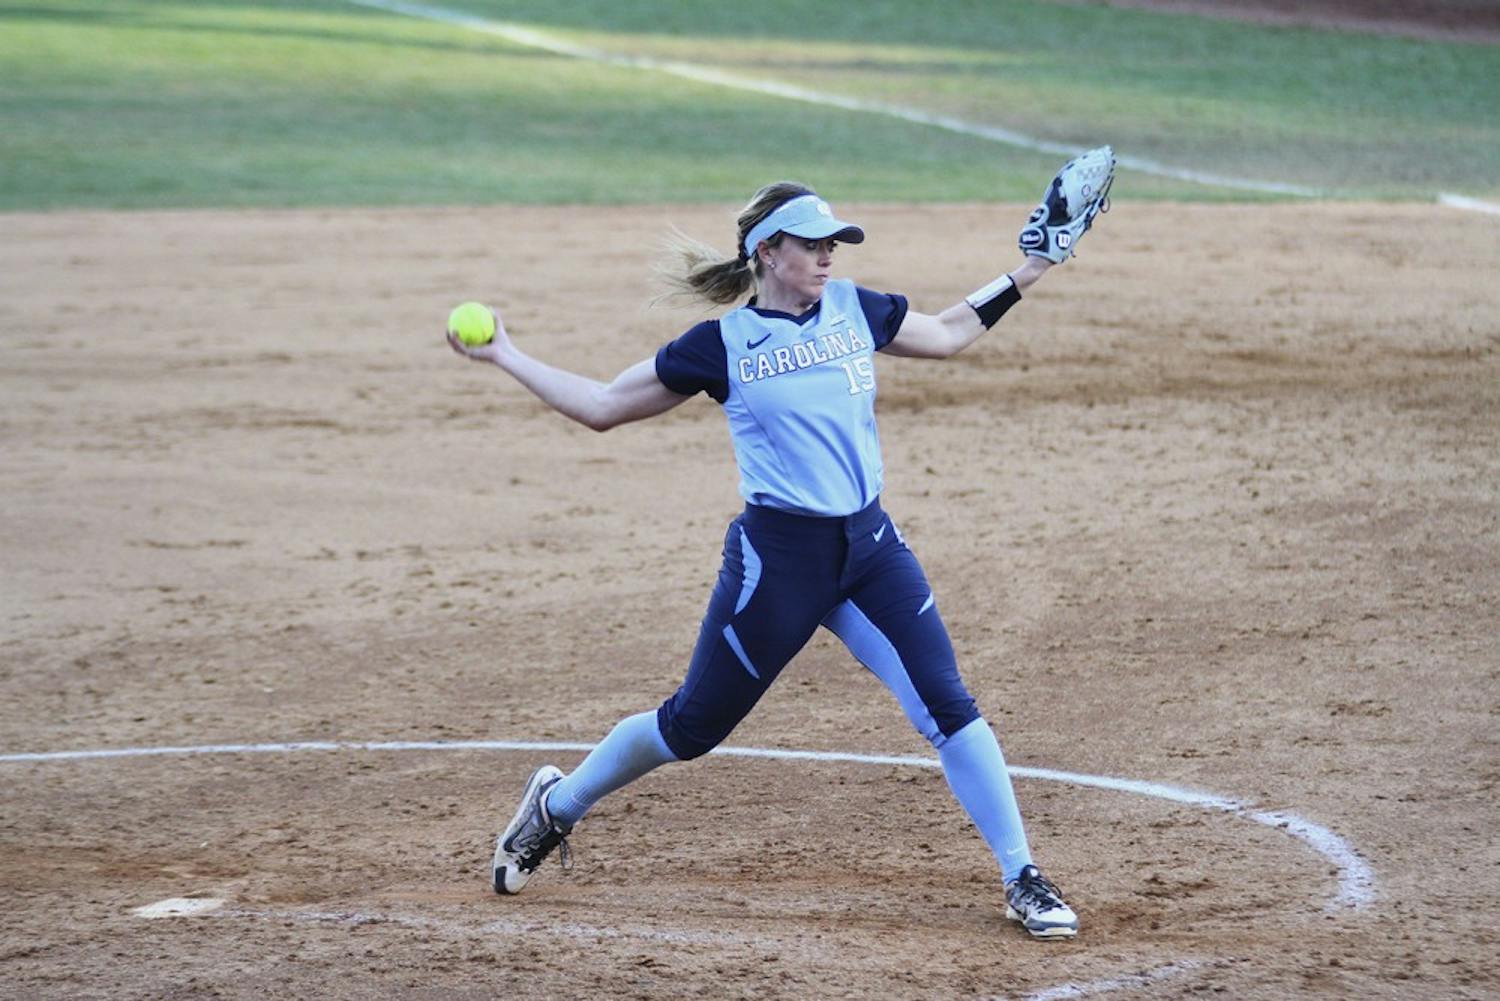 Kendra Lynch throws a pitch during North Carolina’s 8-0 shutout against Georgetown on Feb. 28.